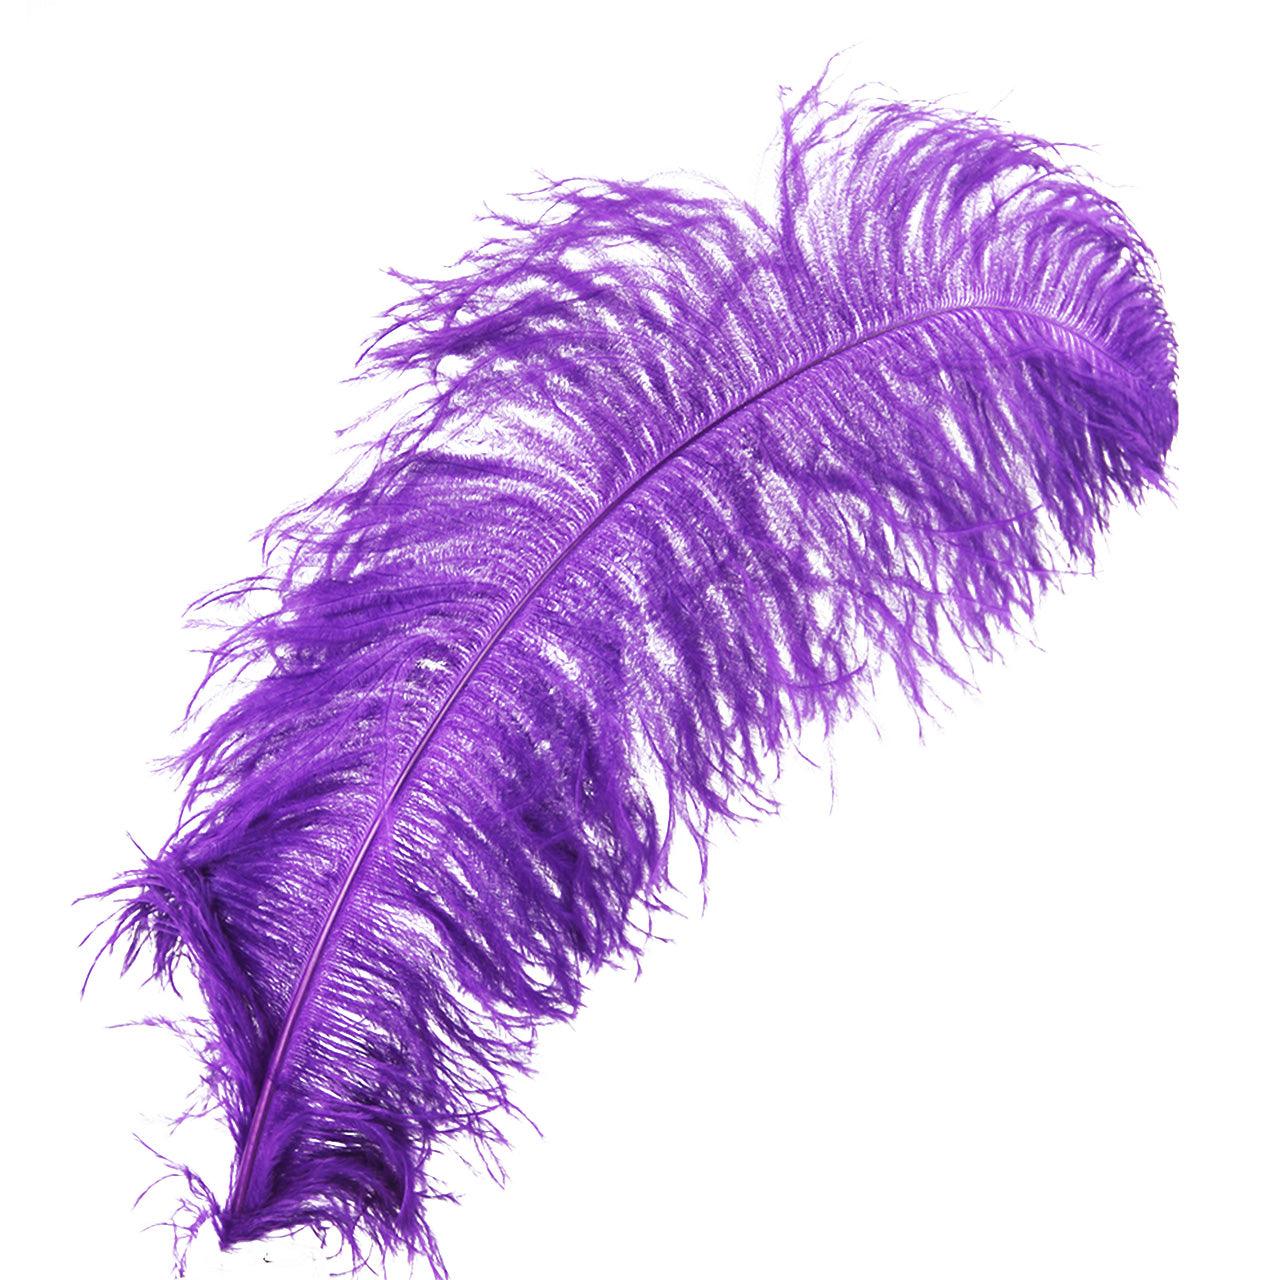 3 Pcs Purple Large Ostrich Feather Plumes 23-28 (Top Quality)